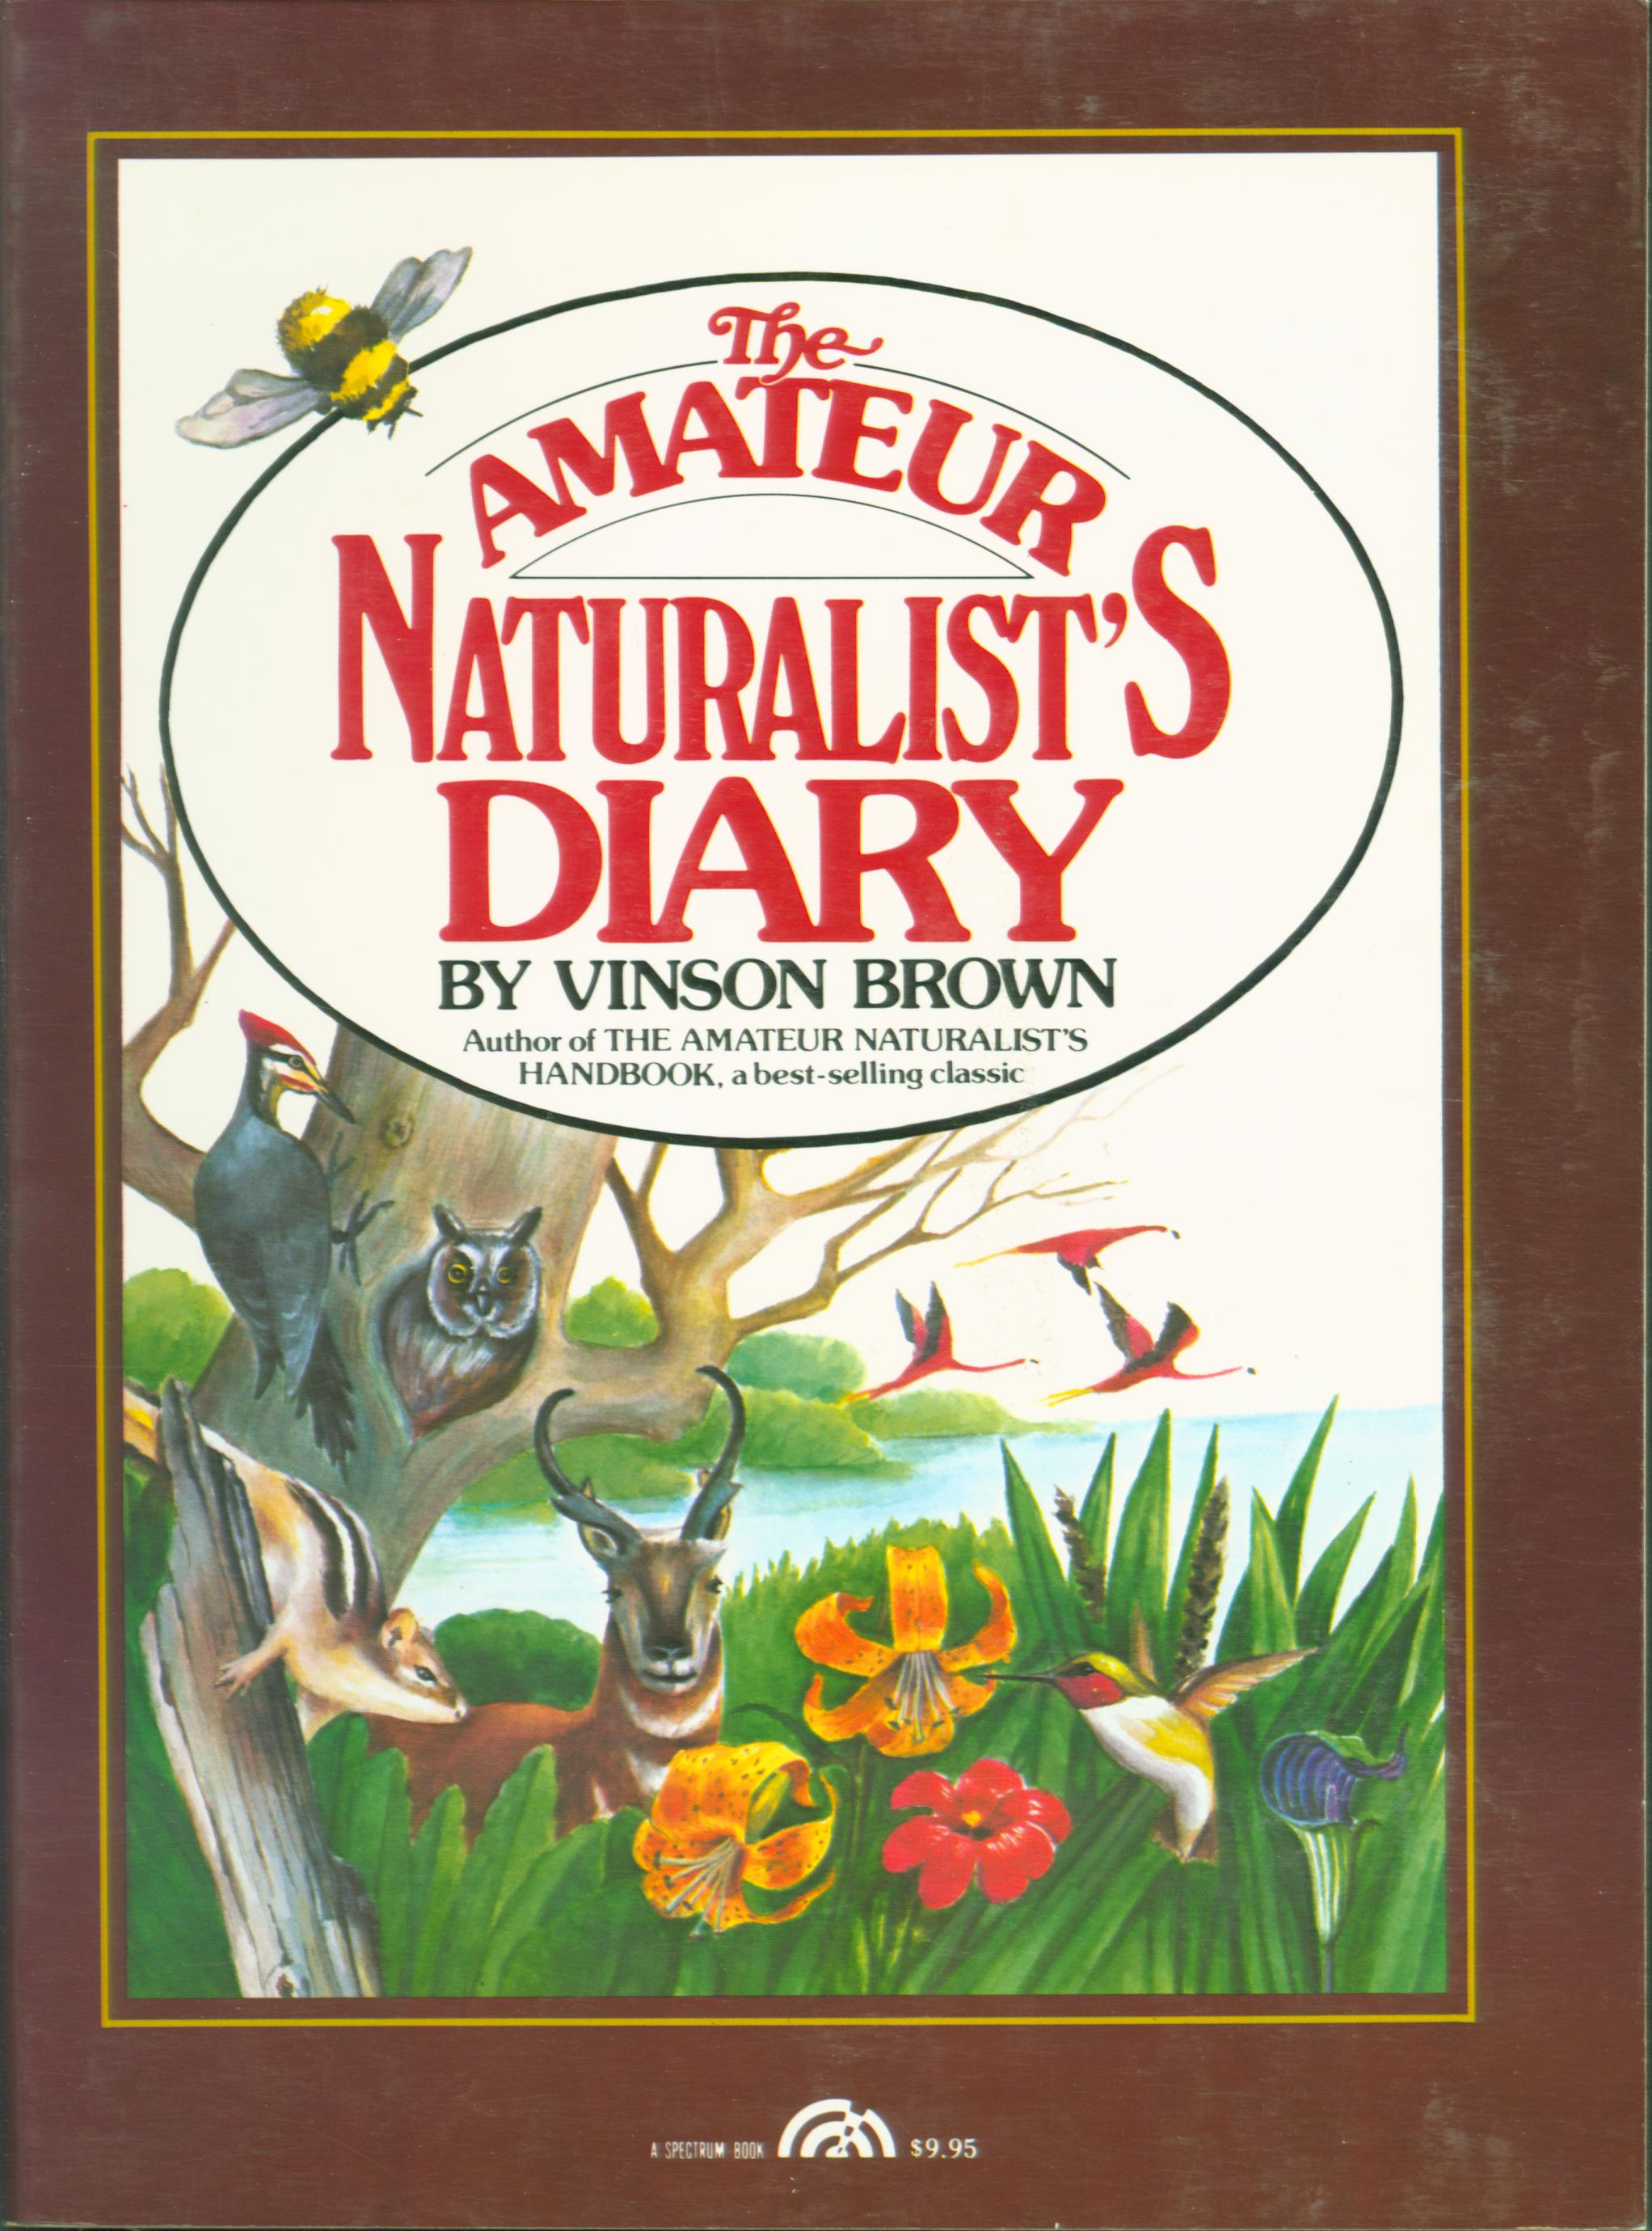 THE AMATEUR NATURALIST'S DIARY. 